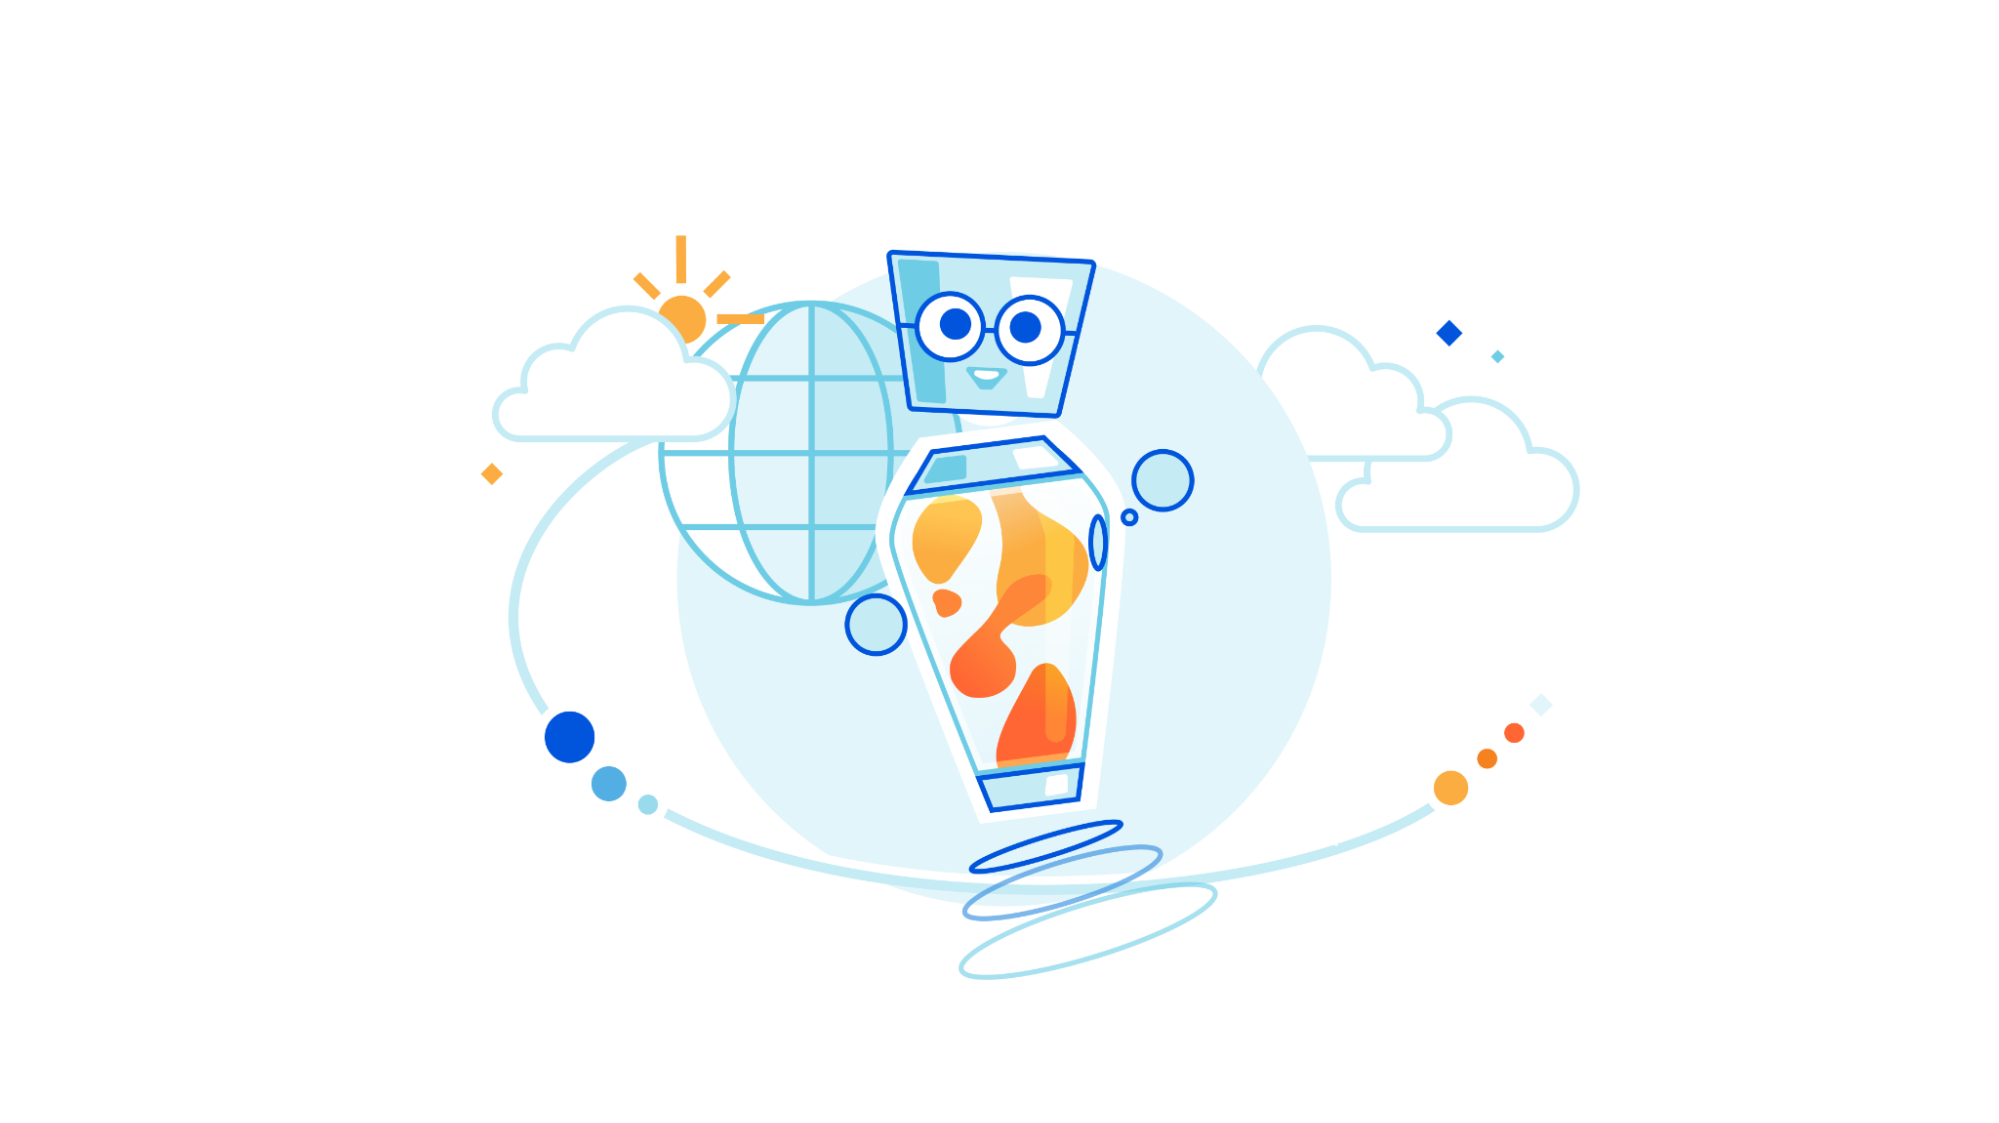 Introducing Cursor: the Cloudflare AI Assistant